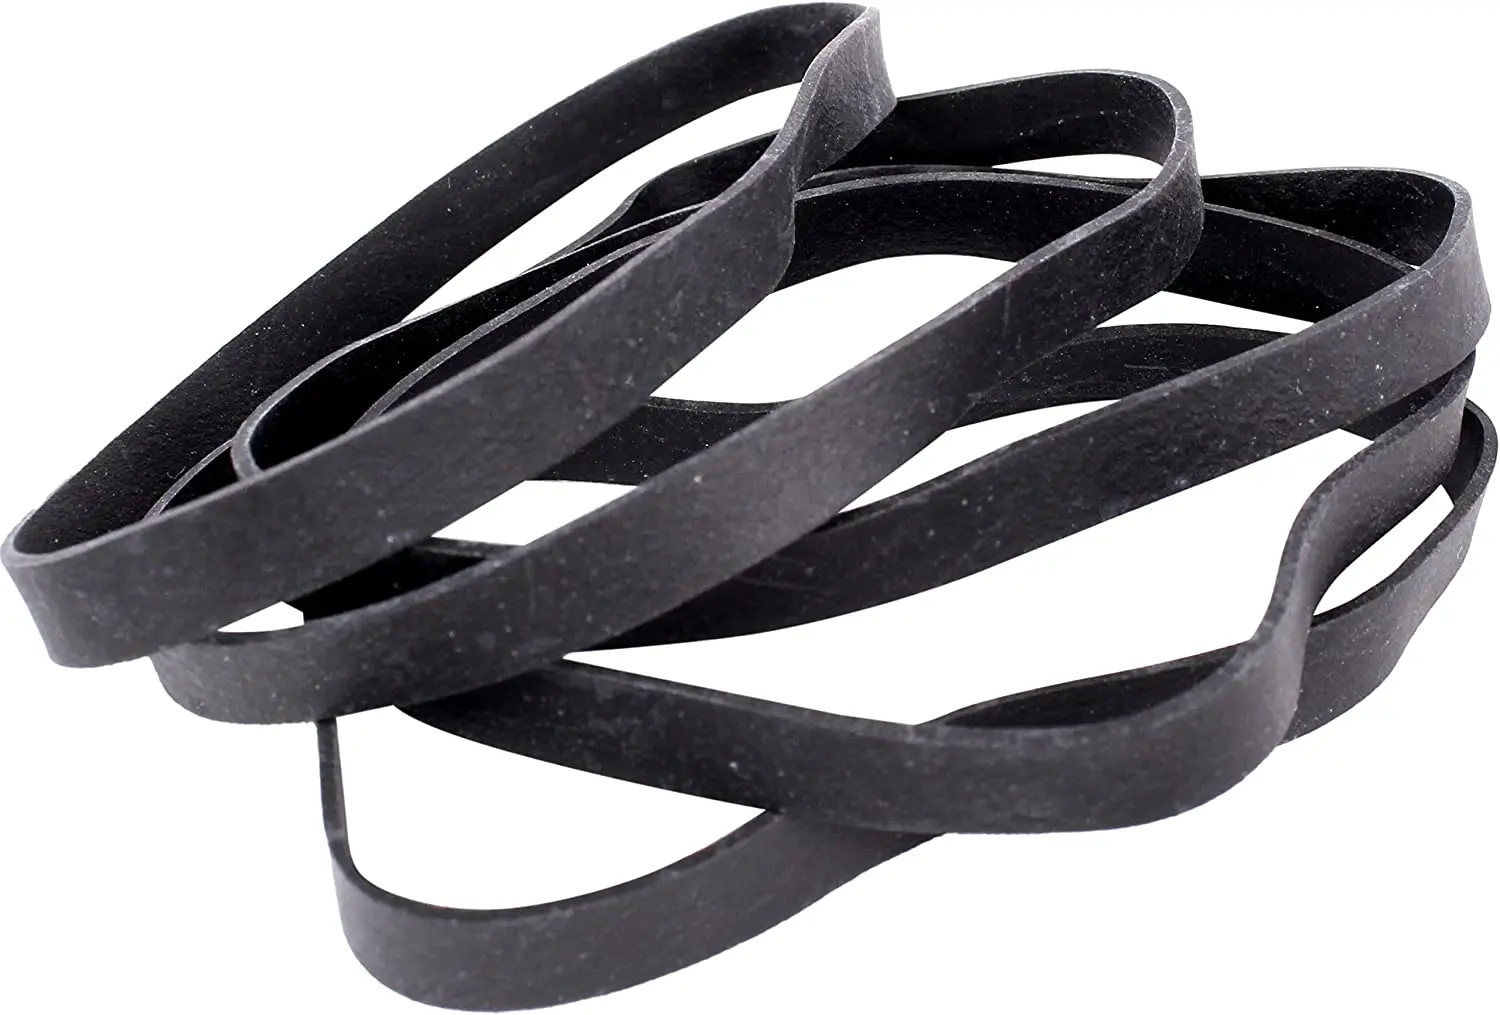 Diameter 7.5cm Black Elastic Rubber Band Heavy Duty Strong Large Package Packing Tie - 10/20/50 You Choose Quantity